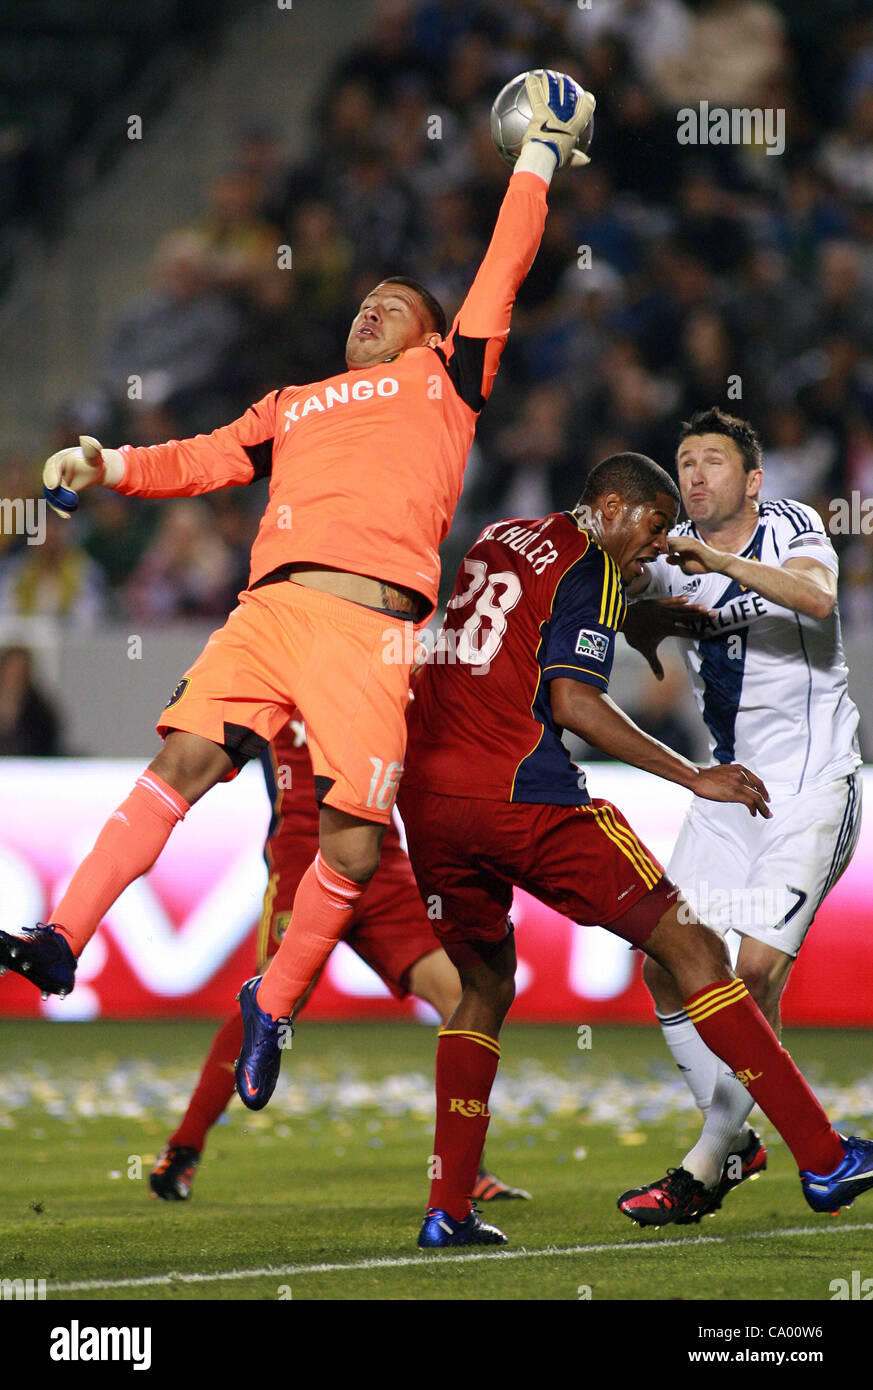 March 10, 2012 - Los Angeles, California, U.S. - Goalkeeper Nick Rimando #18 of Real Salt Lake punches the ball away for a save from Chris Schuler #28 of the Los Angeles Galaxy during the MLS match at The Home Depot Center on March 10, 2012 in Carson, California. Real Salt Lake defeated the Galaxy 3 Stock Photo